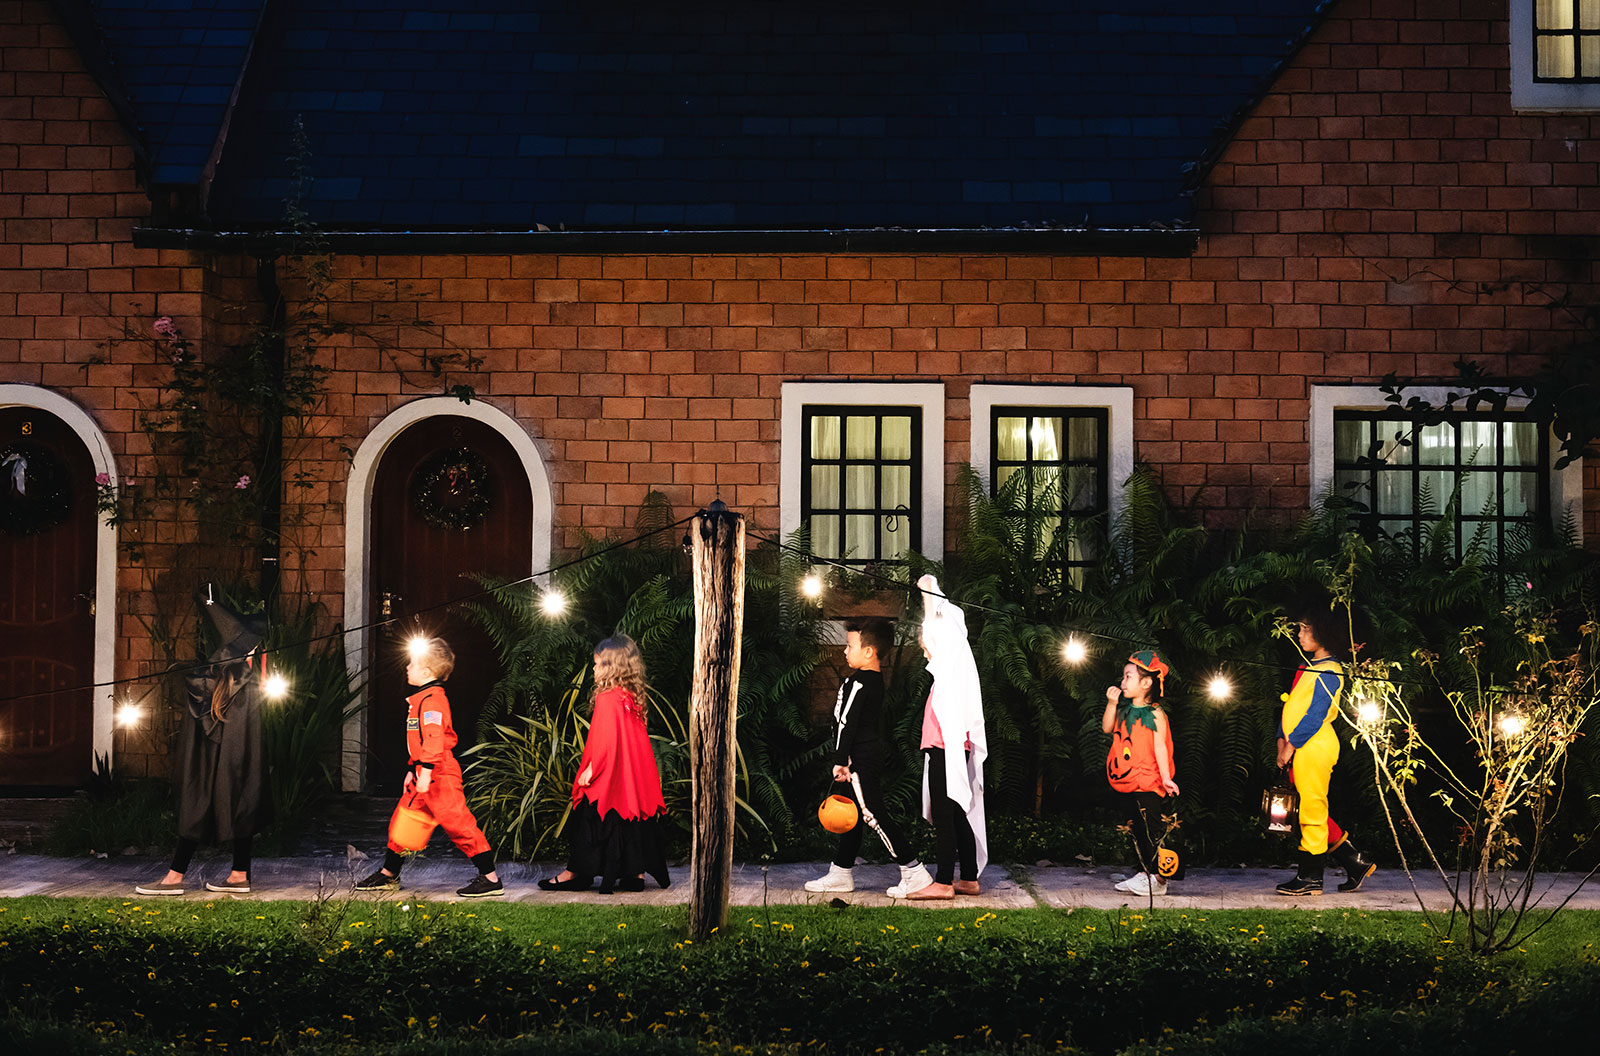 Group of kids with Halloween costumes trick or treating